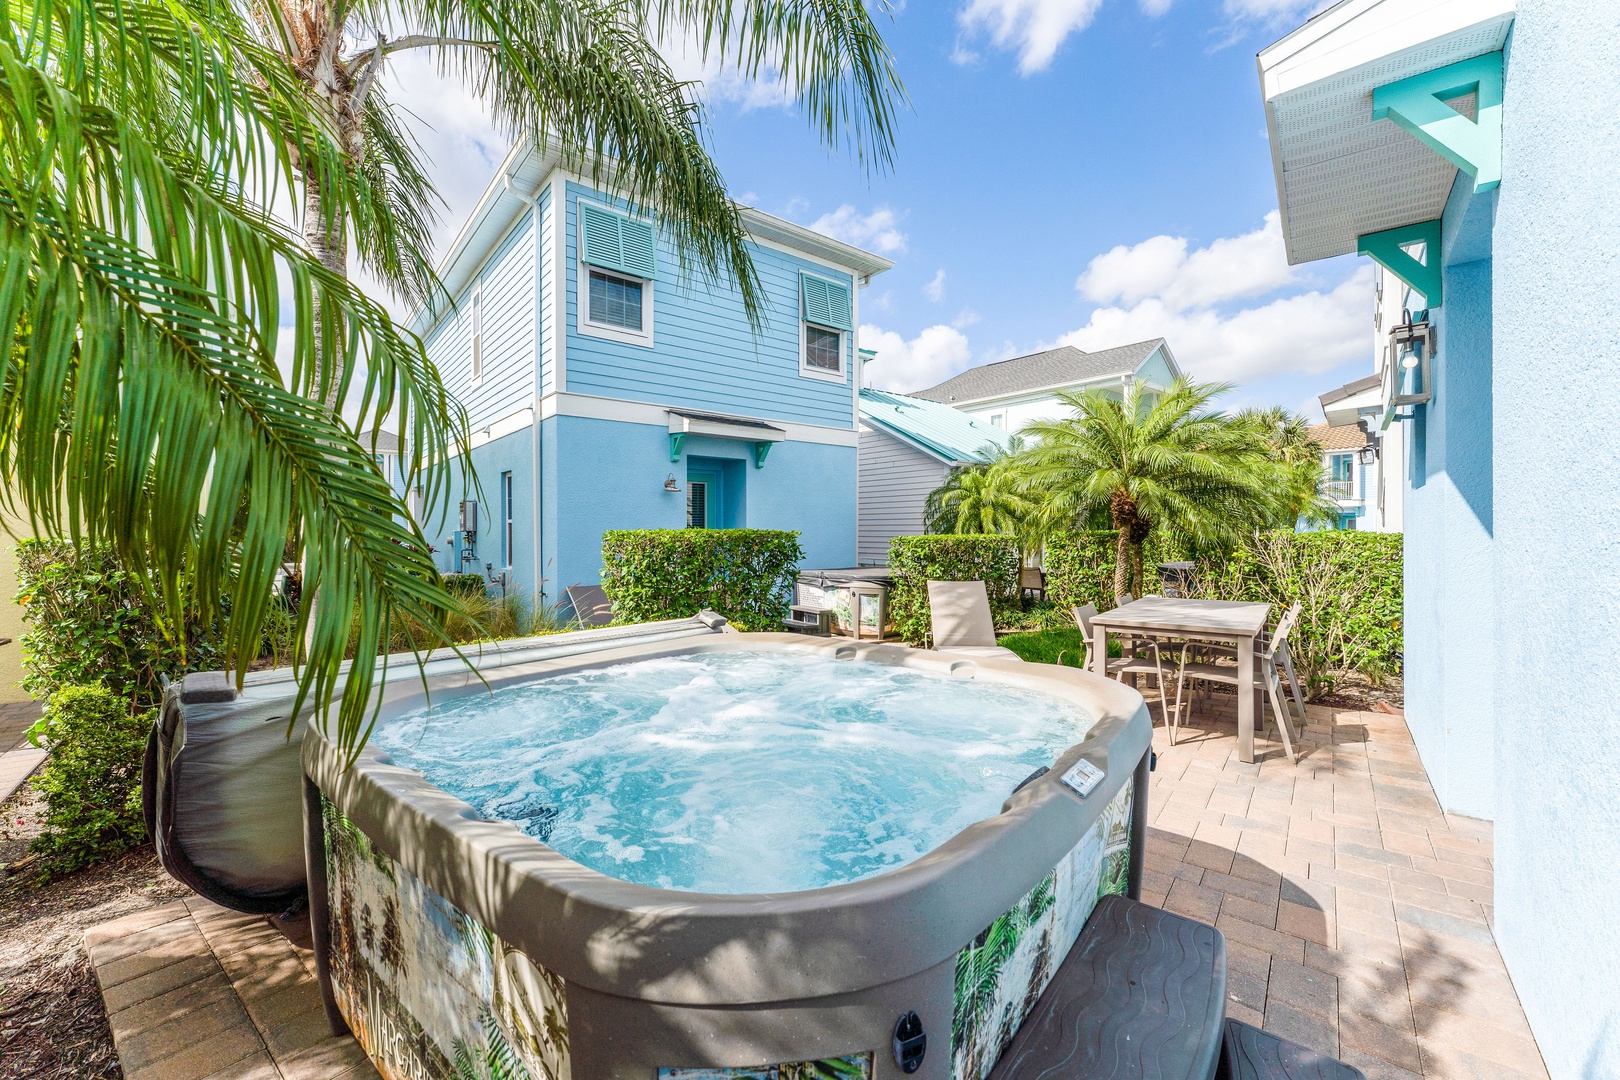 Unwind in the private hot tub, soaking away your cares in the sunshine